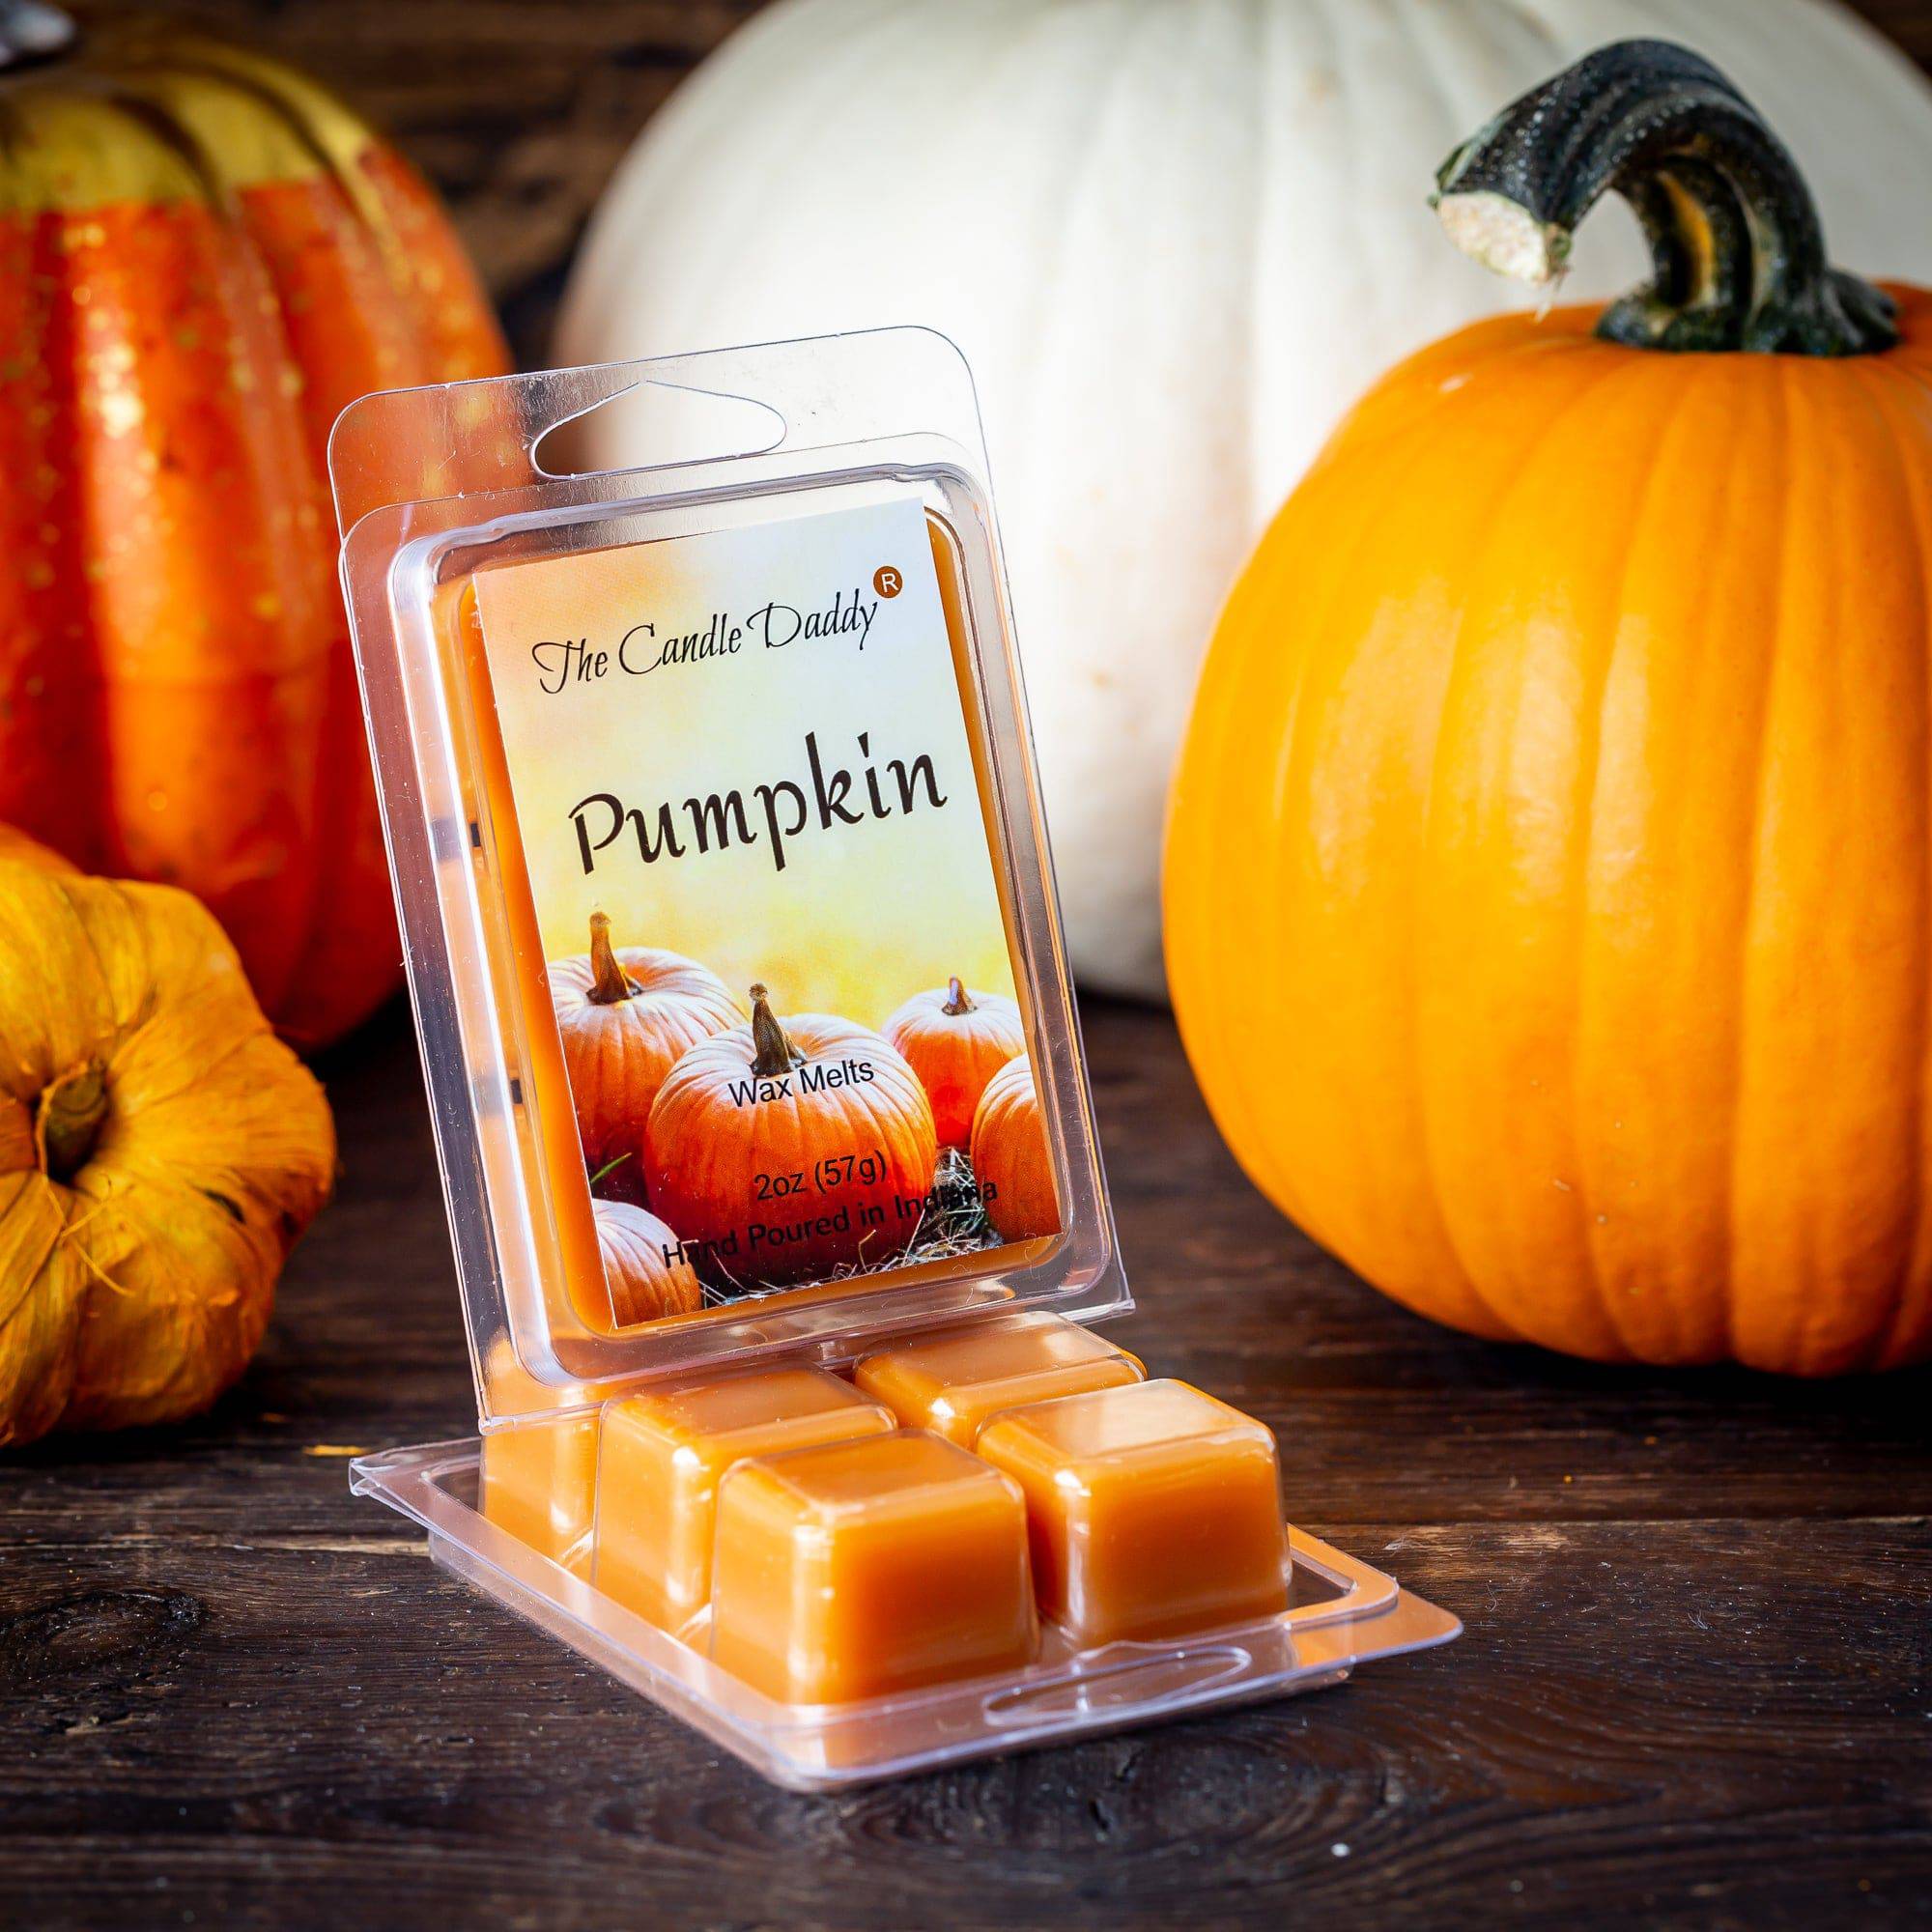 Happy Wax Spicy Pumpkin Scented Soy Wax Melts Collection 6 Oz. of Scented  Wax Melts, Made in USA Spicy Pumpkin 6 oz